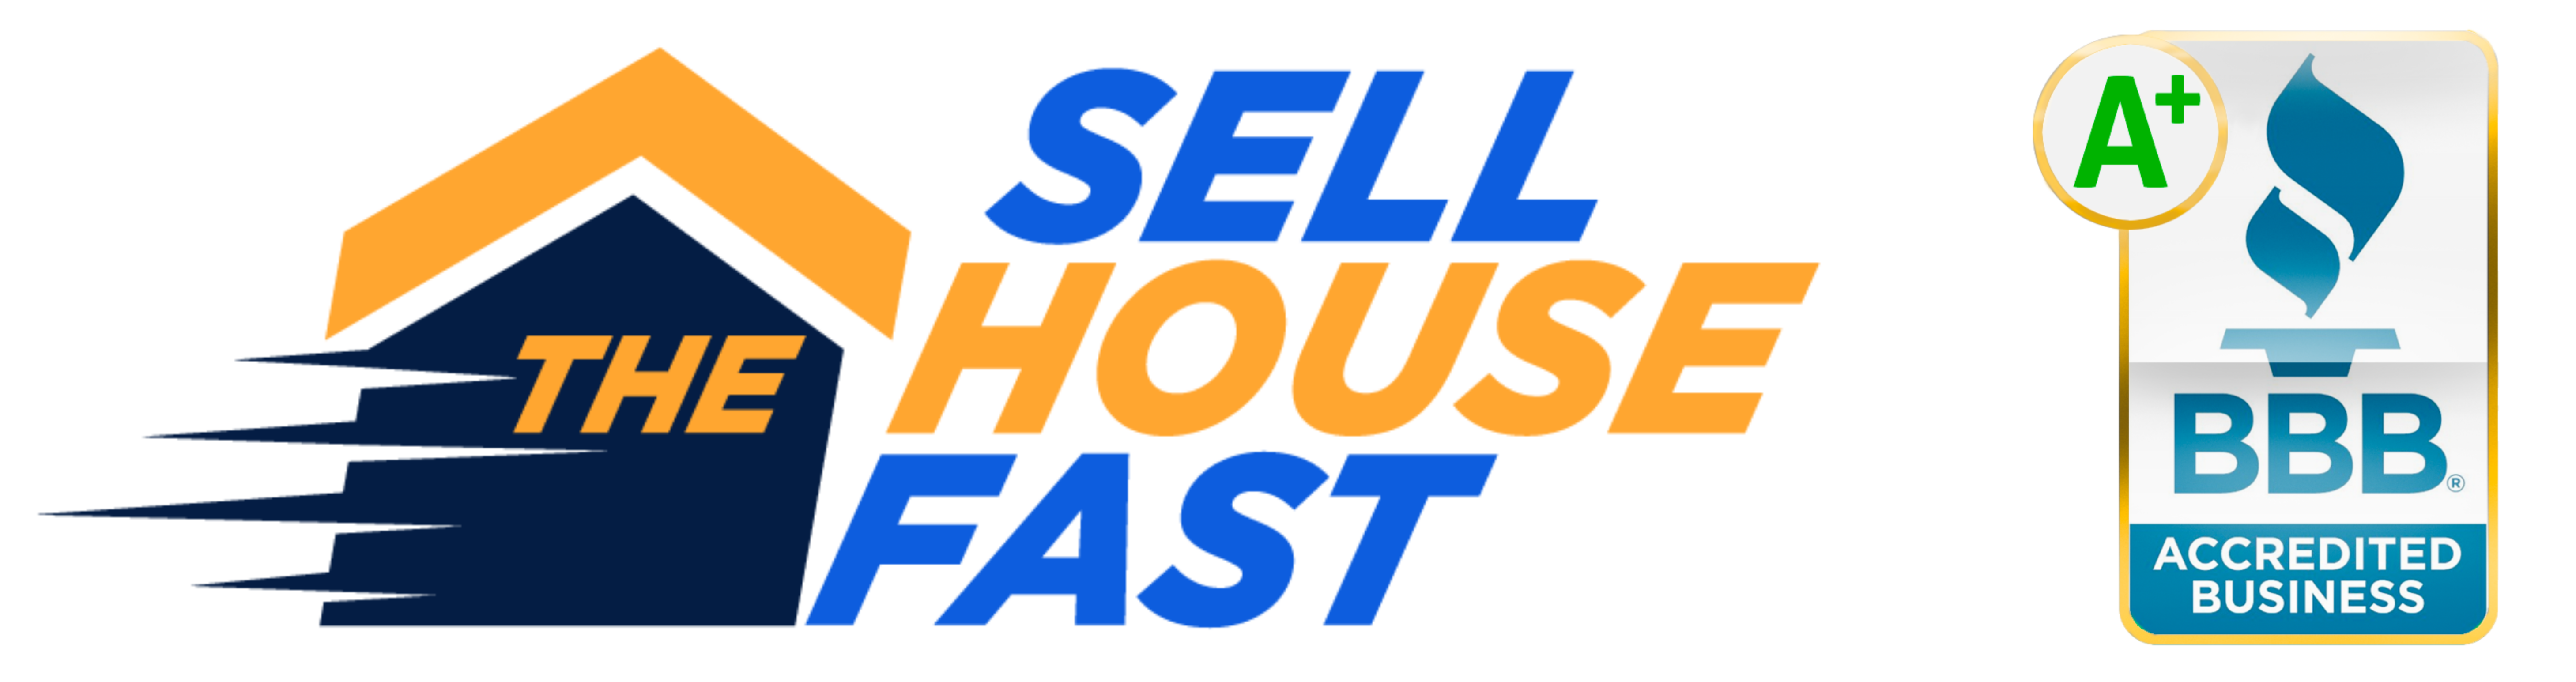 Sell The House Fast logo